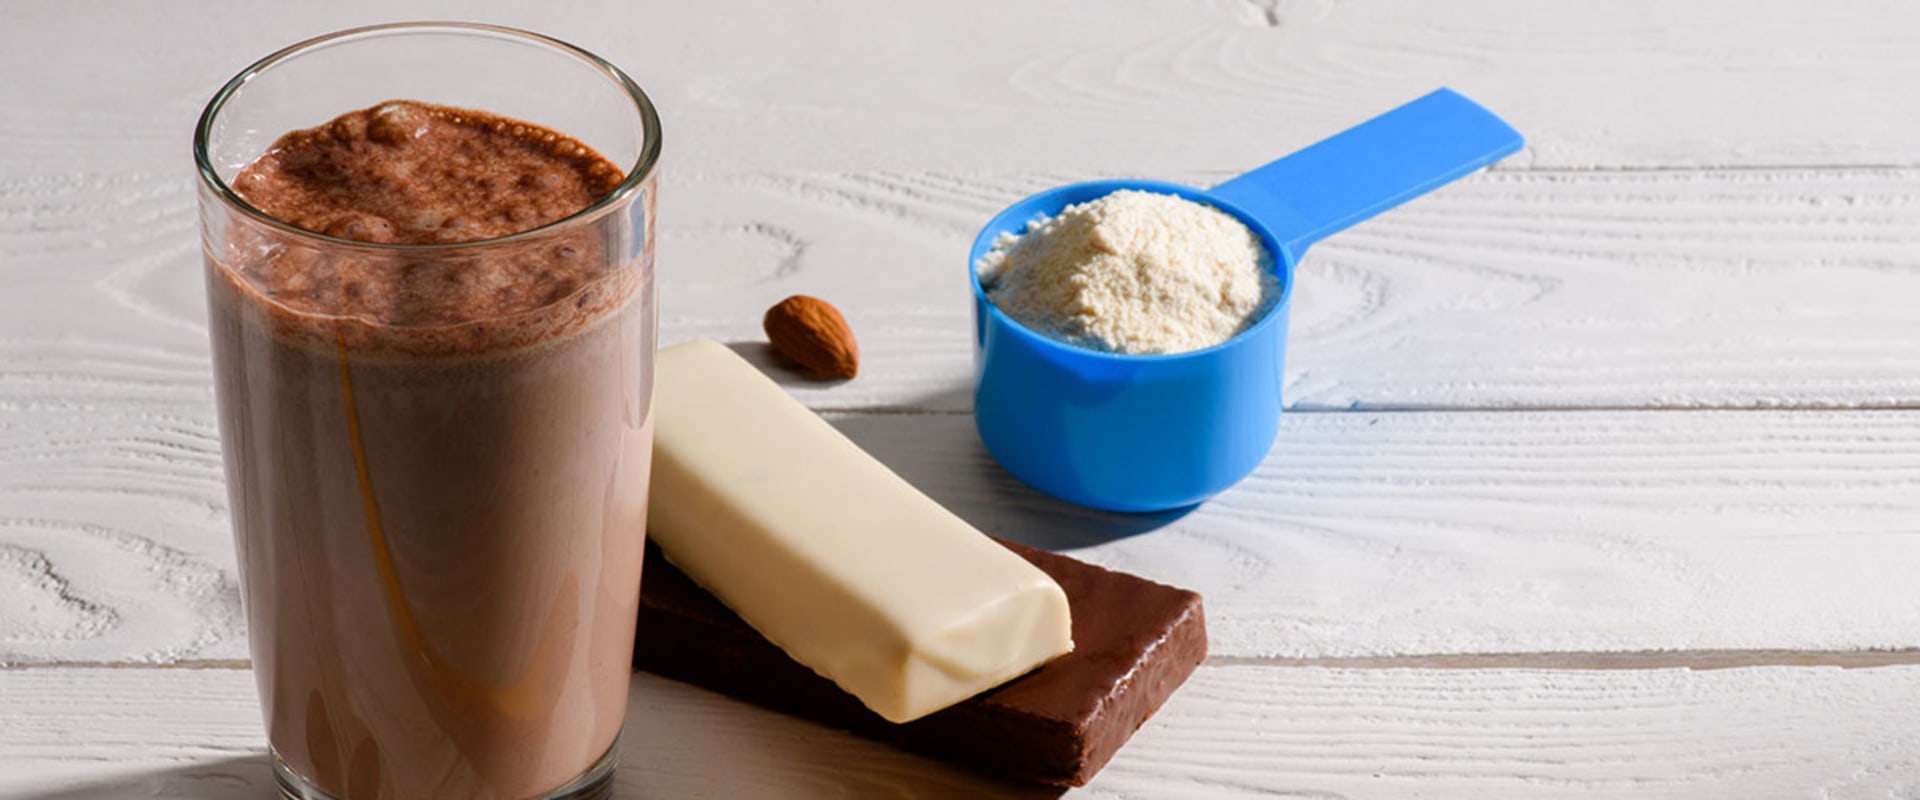 How many protein shakes should i drink a week to lose weight?